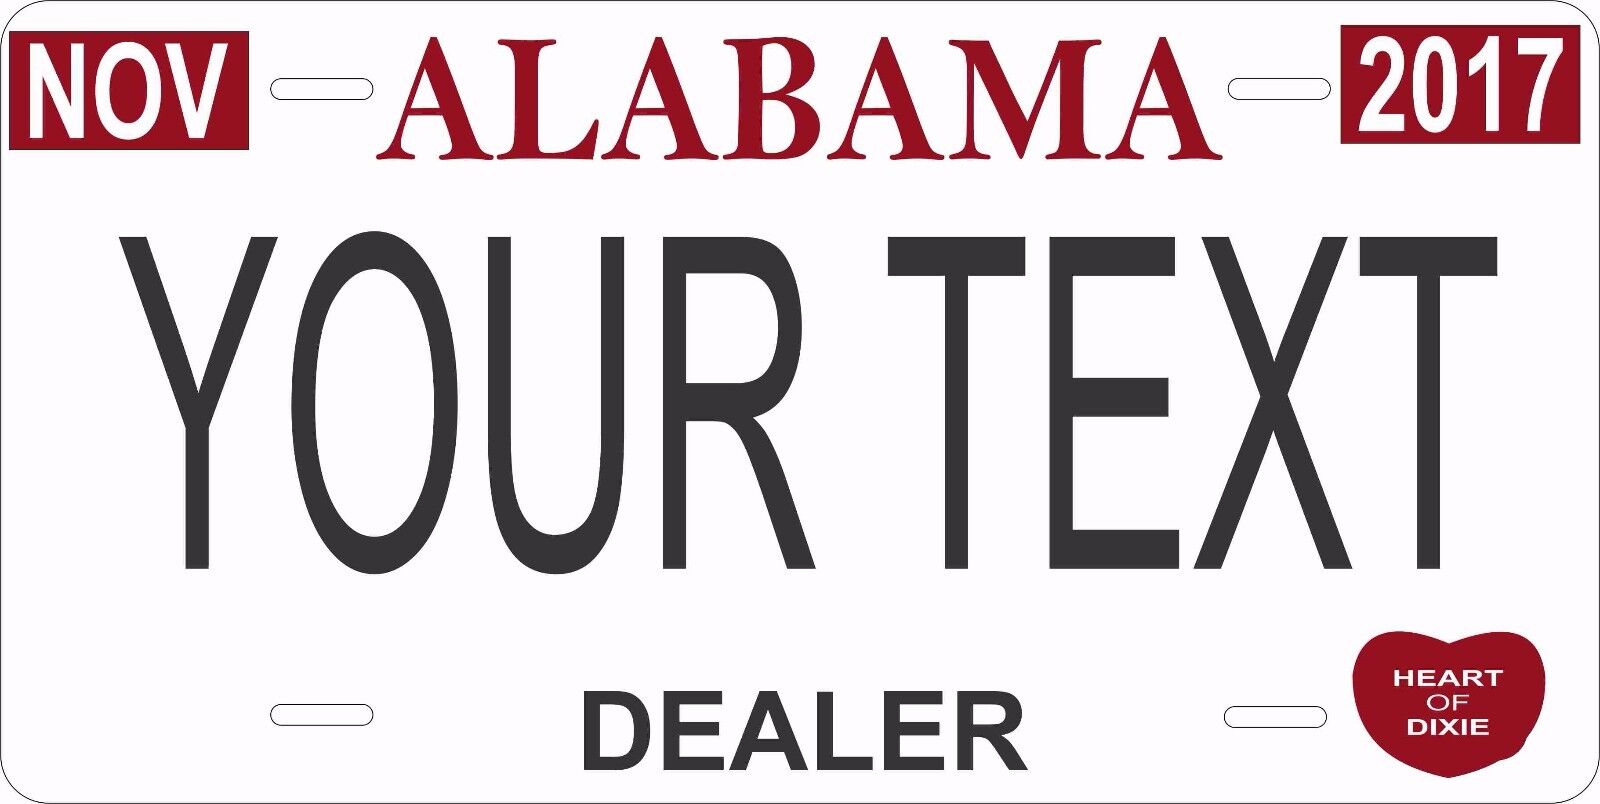 Alabama Dealer License Plate Personalized Custom Car Auto Bike Motorcycle Moped